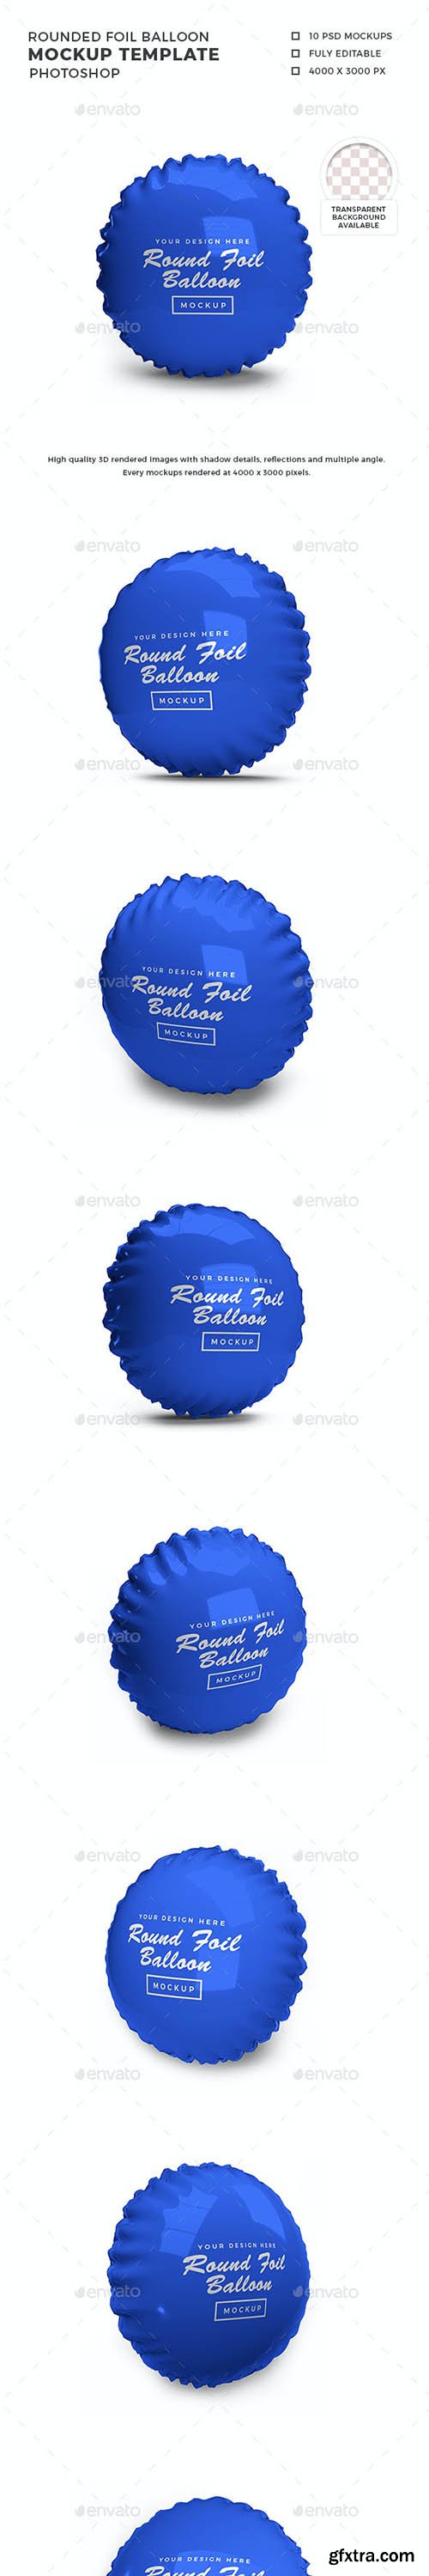 GraphicRiver - Rounded Foil Balloon 3D Mockup Template 30873705